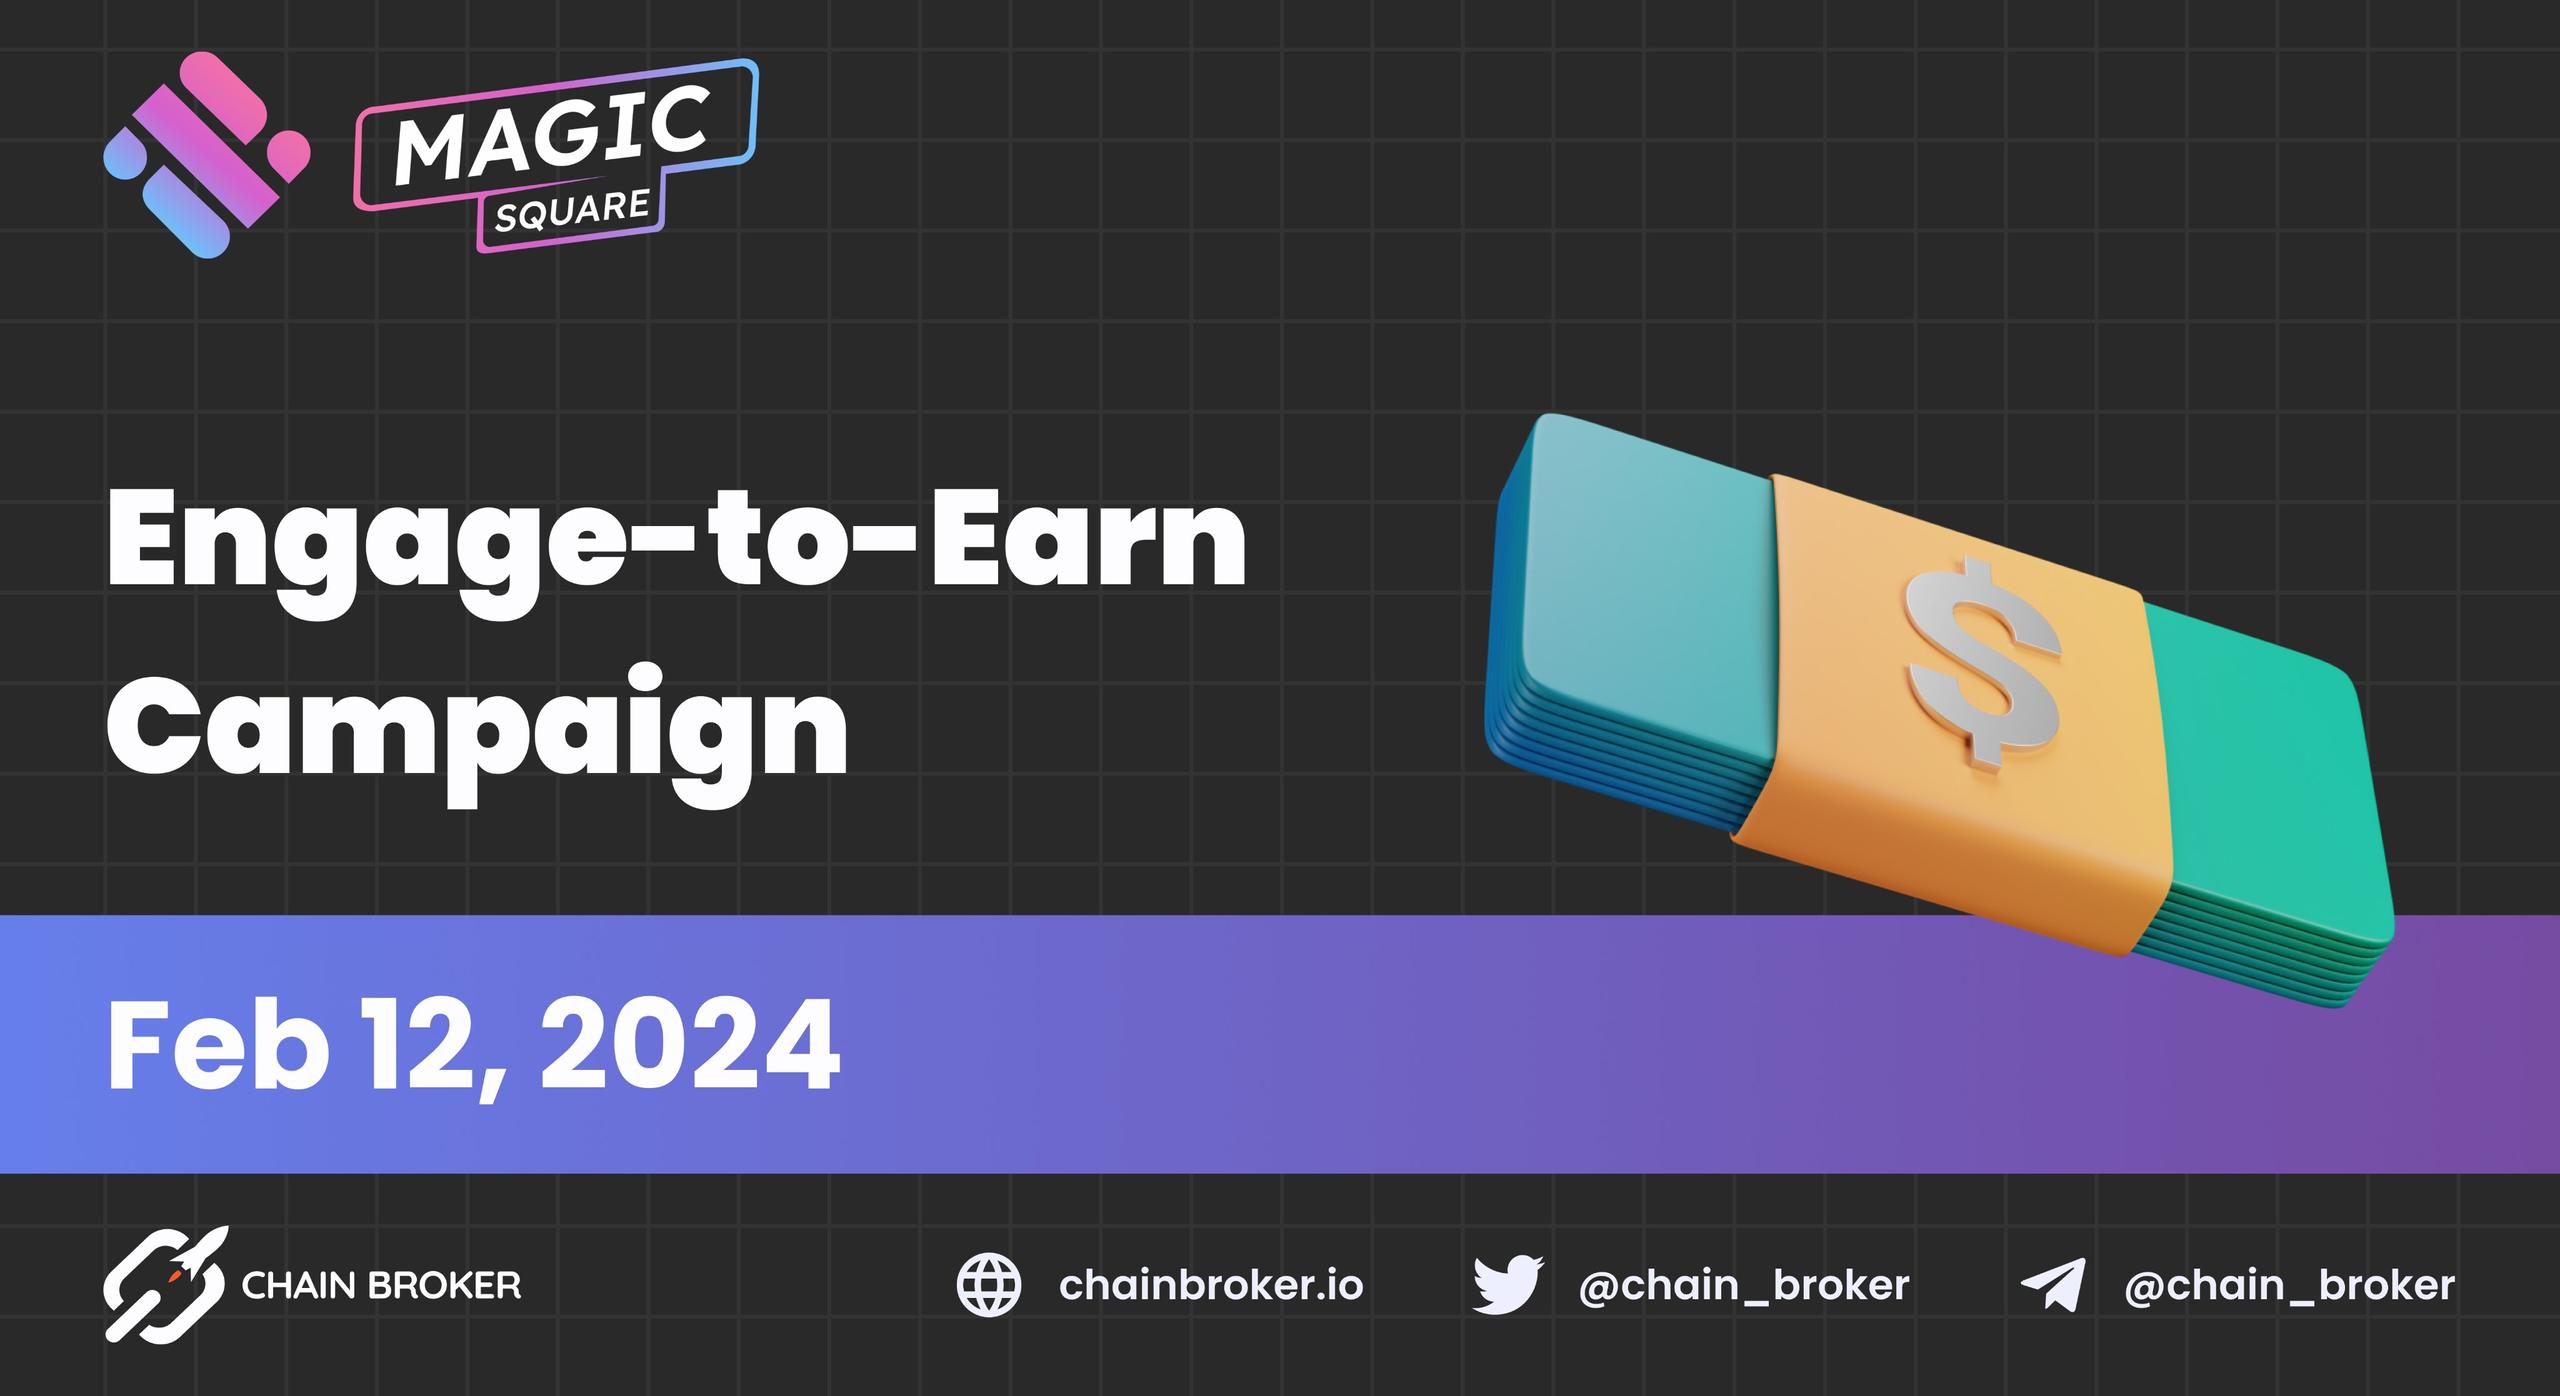 Magic Square presents the Engage-to-Earn Campaign